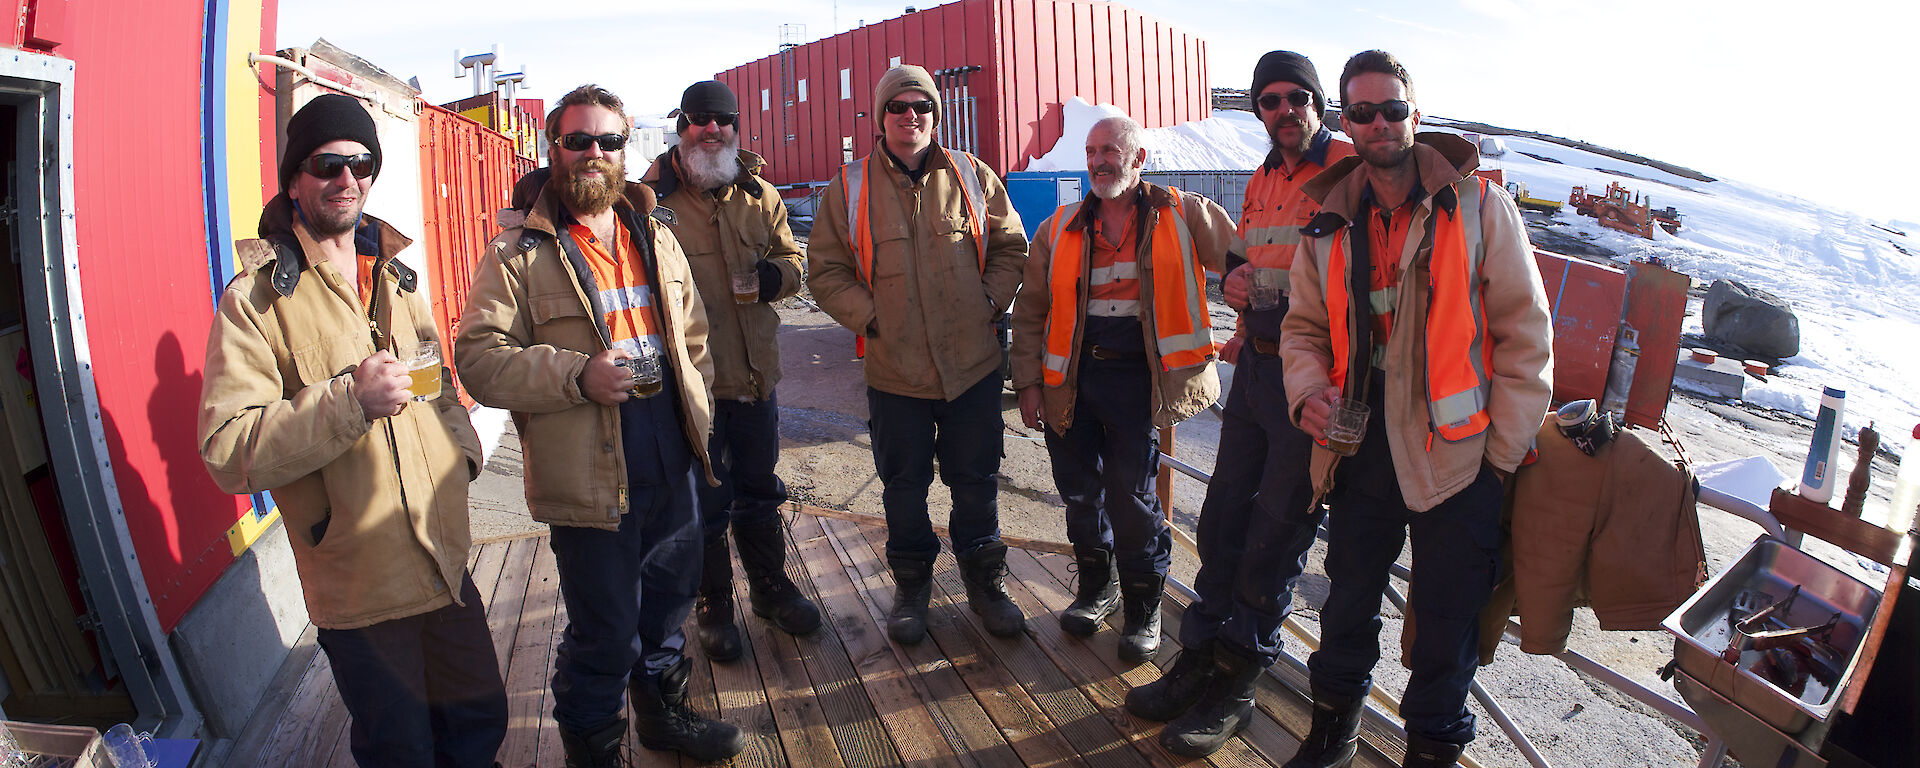 Seven expeditioners stadning on the verandah of the Rosella Building at the barbecue